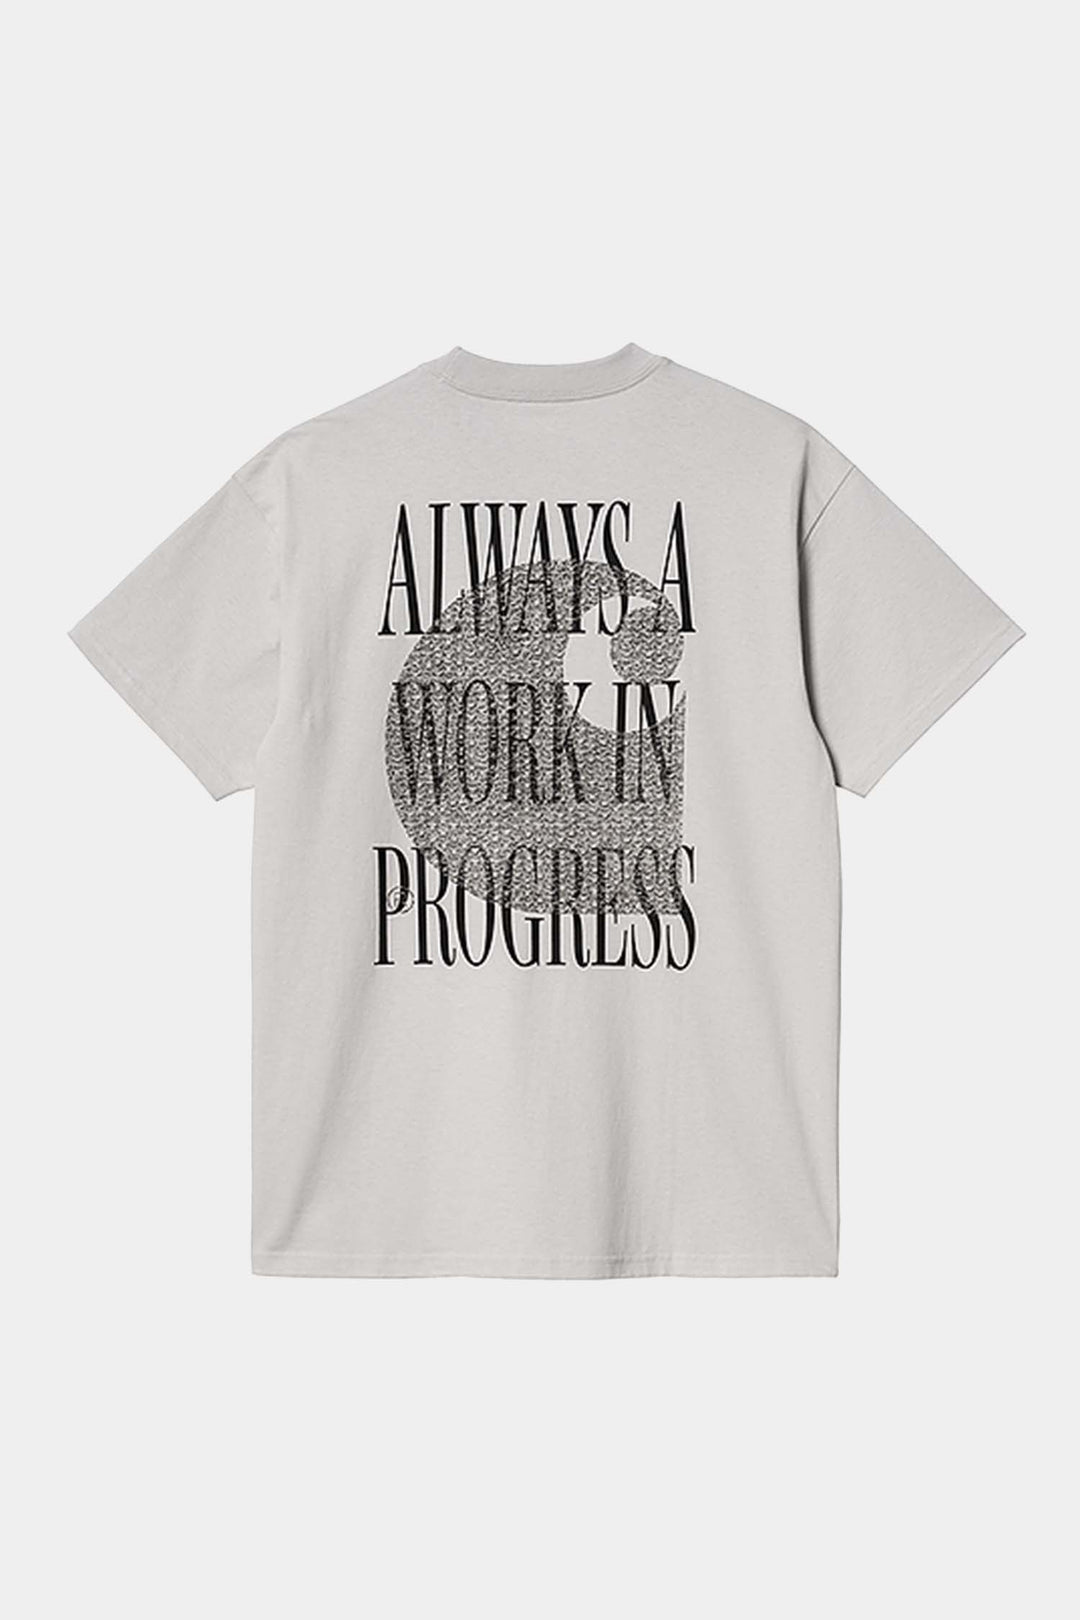 T-Shirt S/S Always a Wip